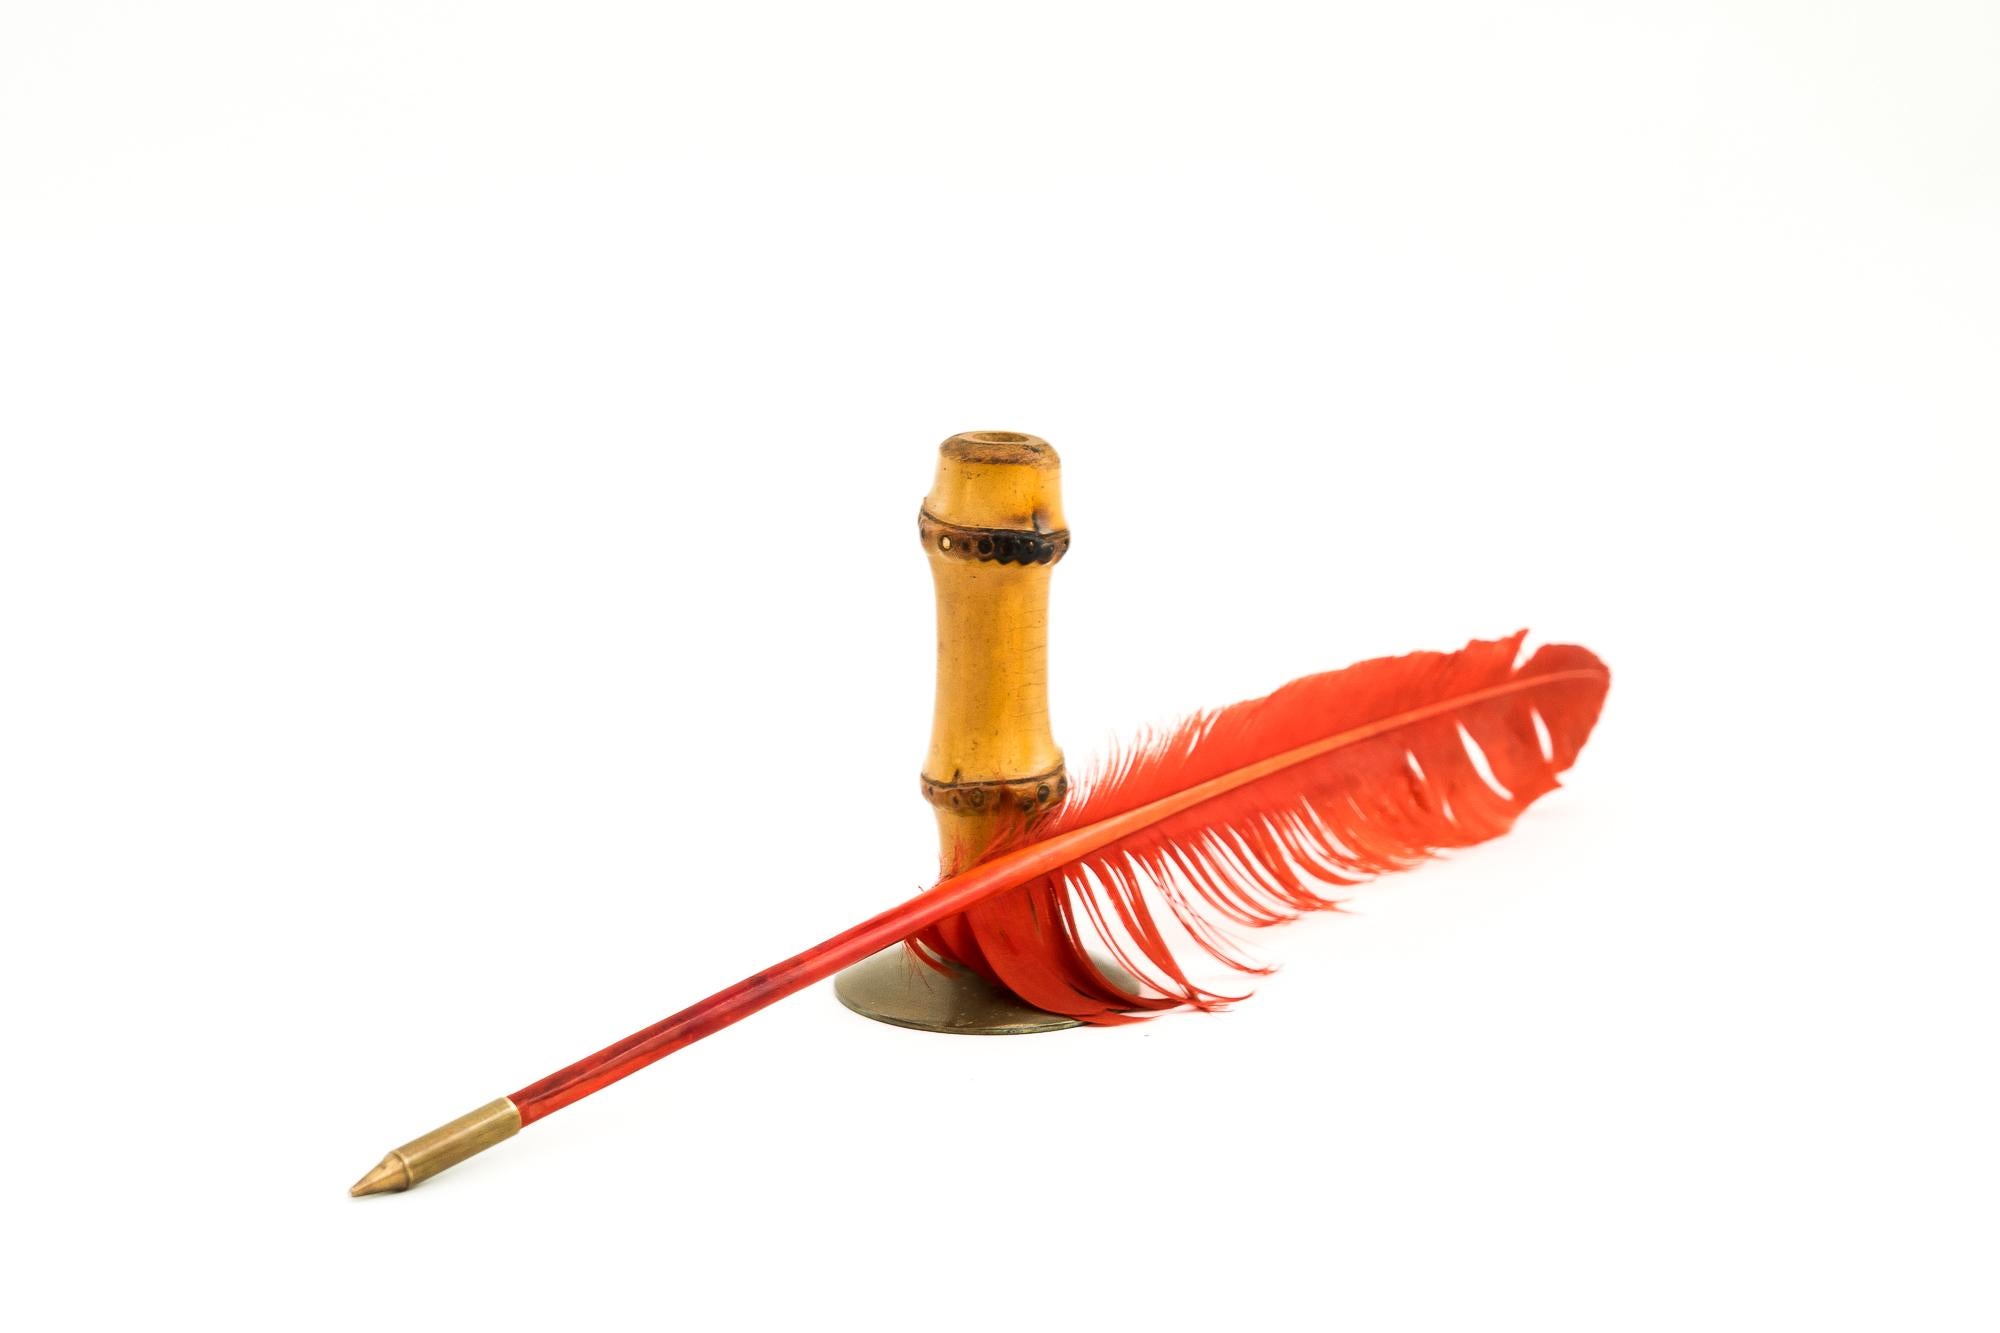 Bamboo and brass pen holder, around 1960s
Original condition

(the feather is only for the photo shoot and is not included).